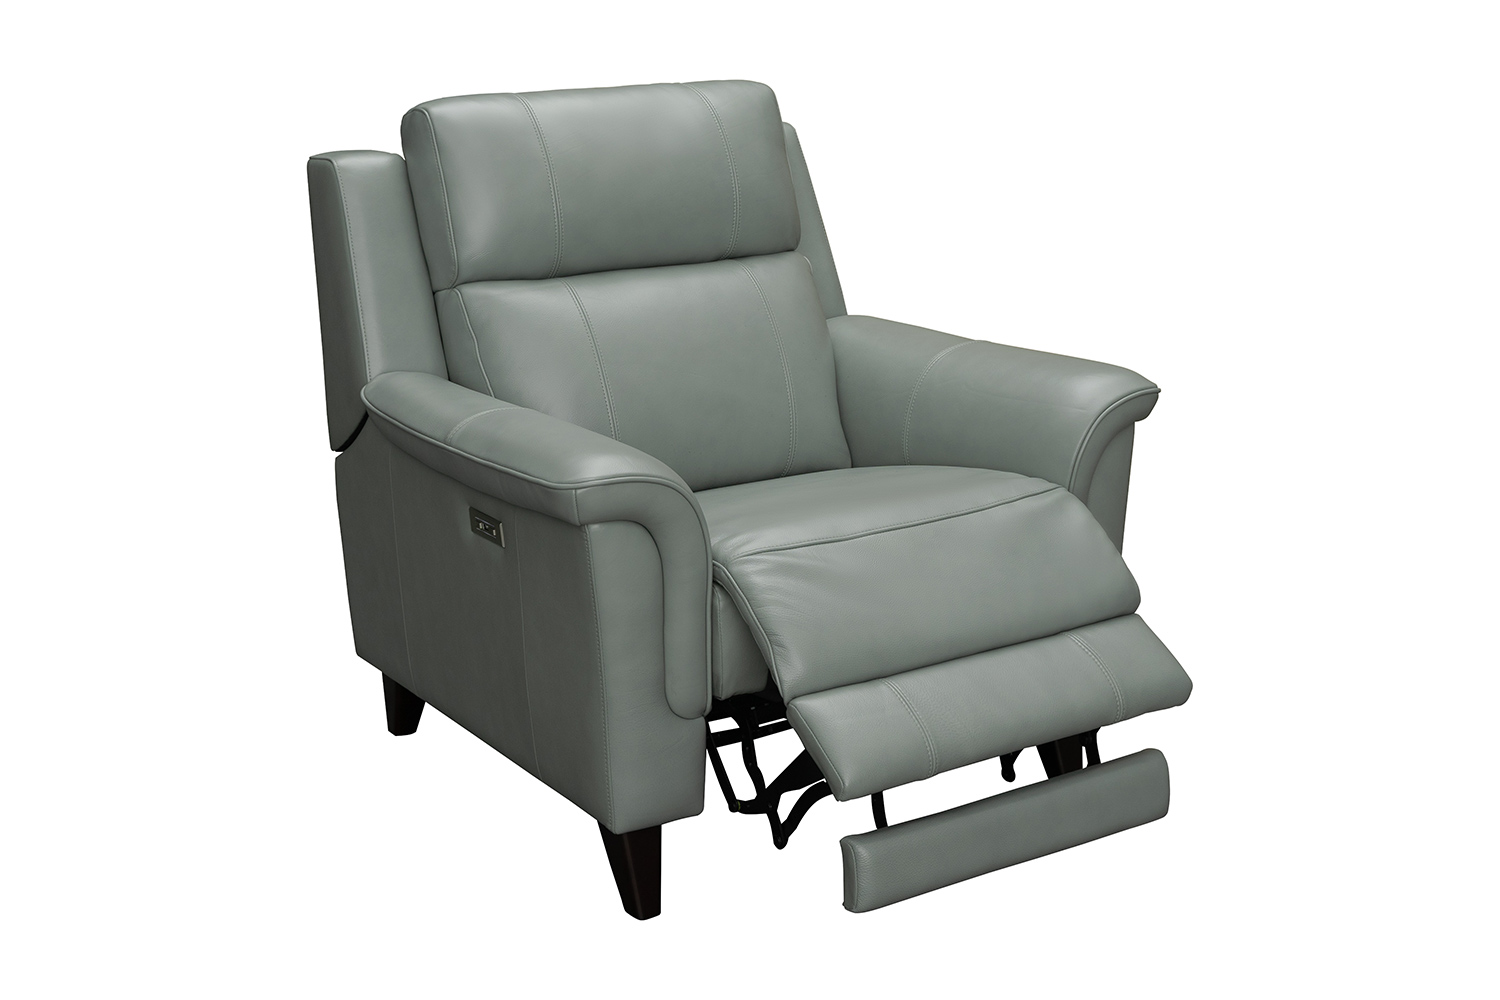 Barcalounger Kester Power Recliner Chair with Power Head Rest - Lorenzo Mint/Leather match